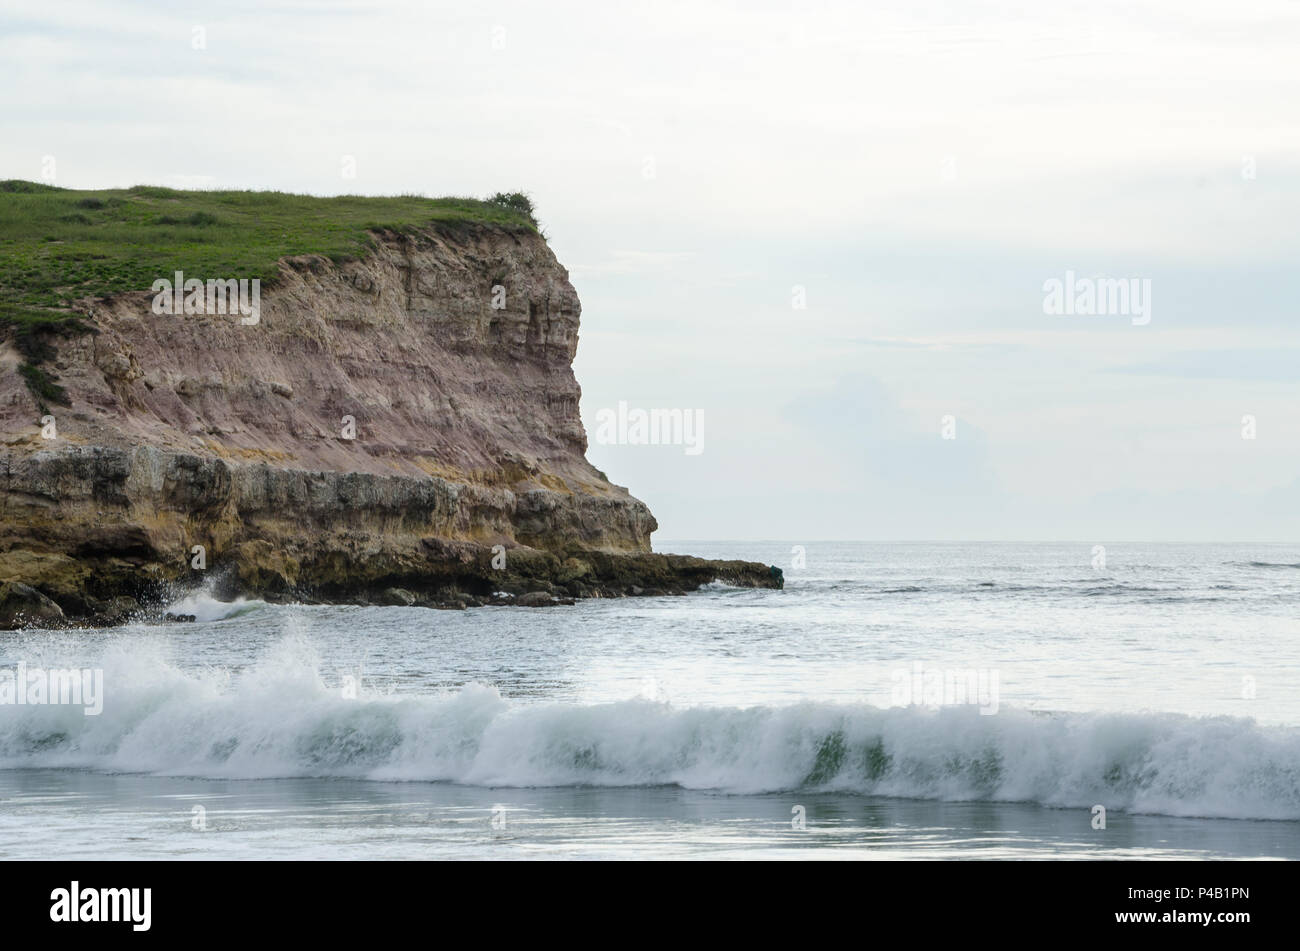 Coastal landscape in Northern Angola with rocky cliff, small waves and white light, N'zeto, Africa. Stock Photo